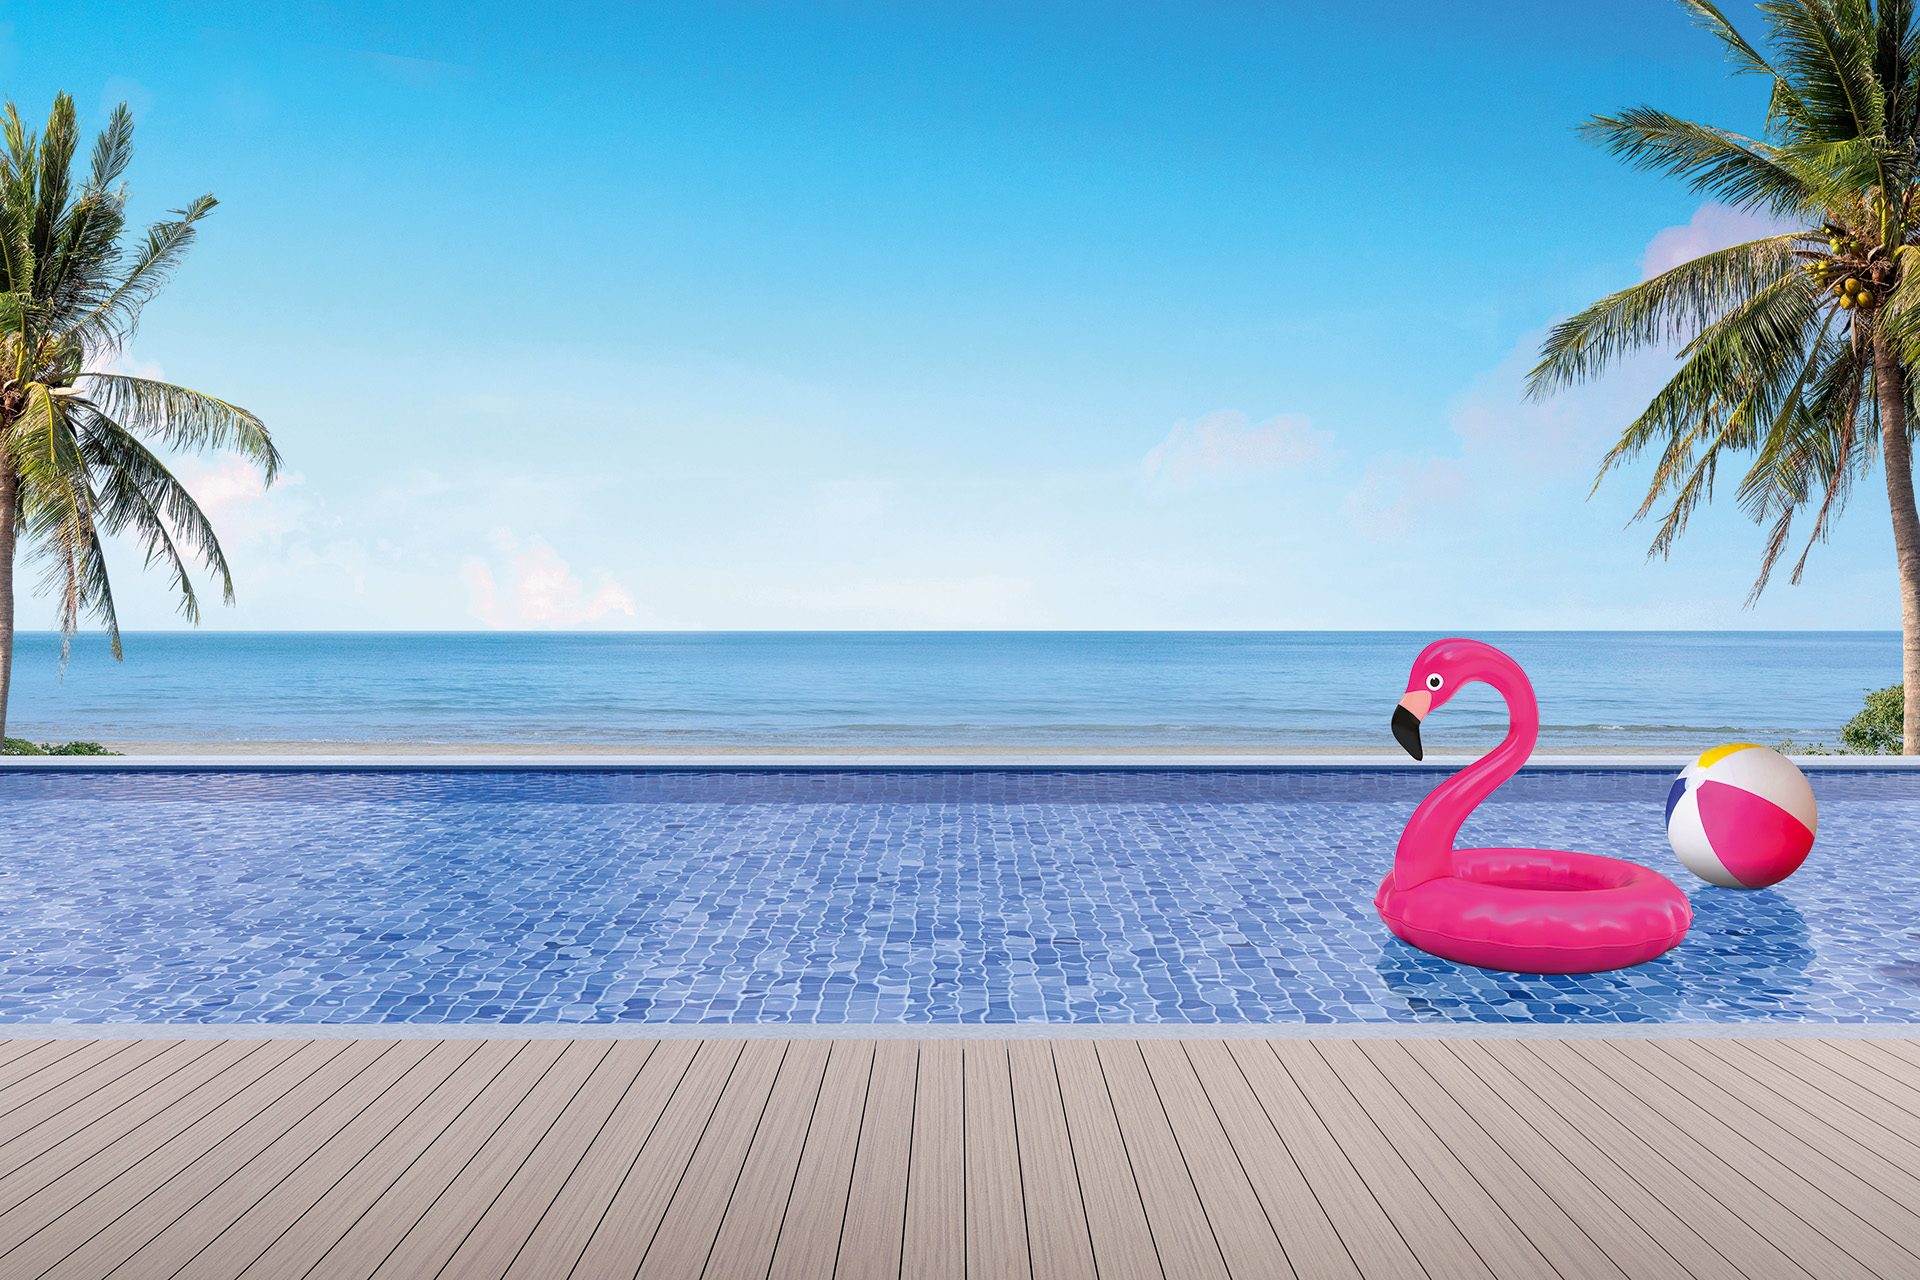 A pink inflatable flamingo swimming ring floats on a clear swimming pool against a beautiful, tropic beach backdrop.